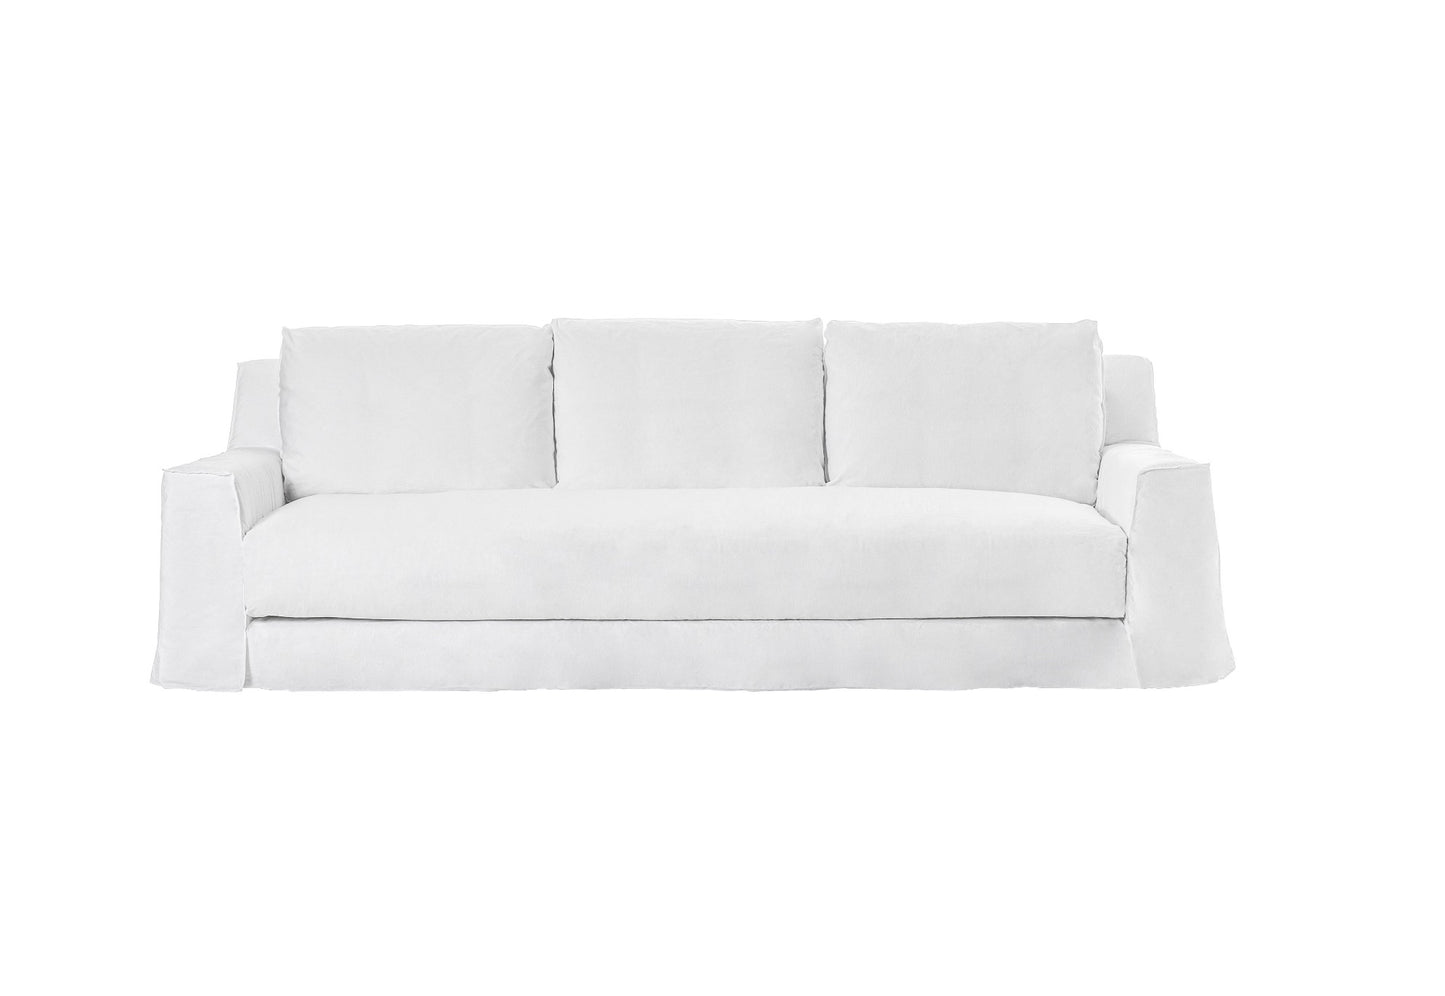 Gervasoni Loll 14 Sofa in White Linen Upholstery by Paola Navone - $9,250.00